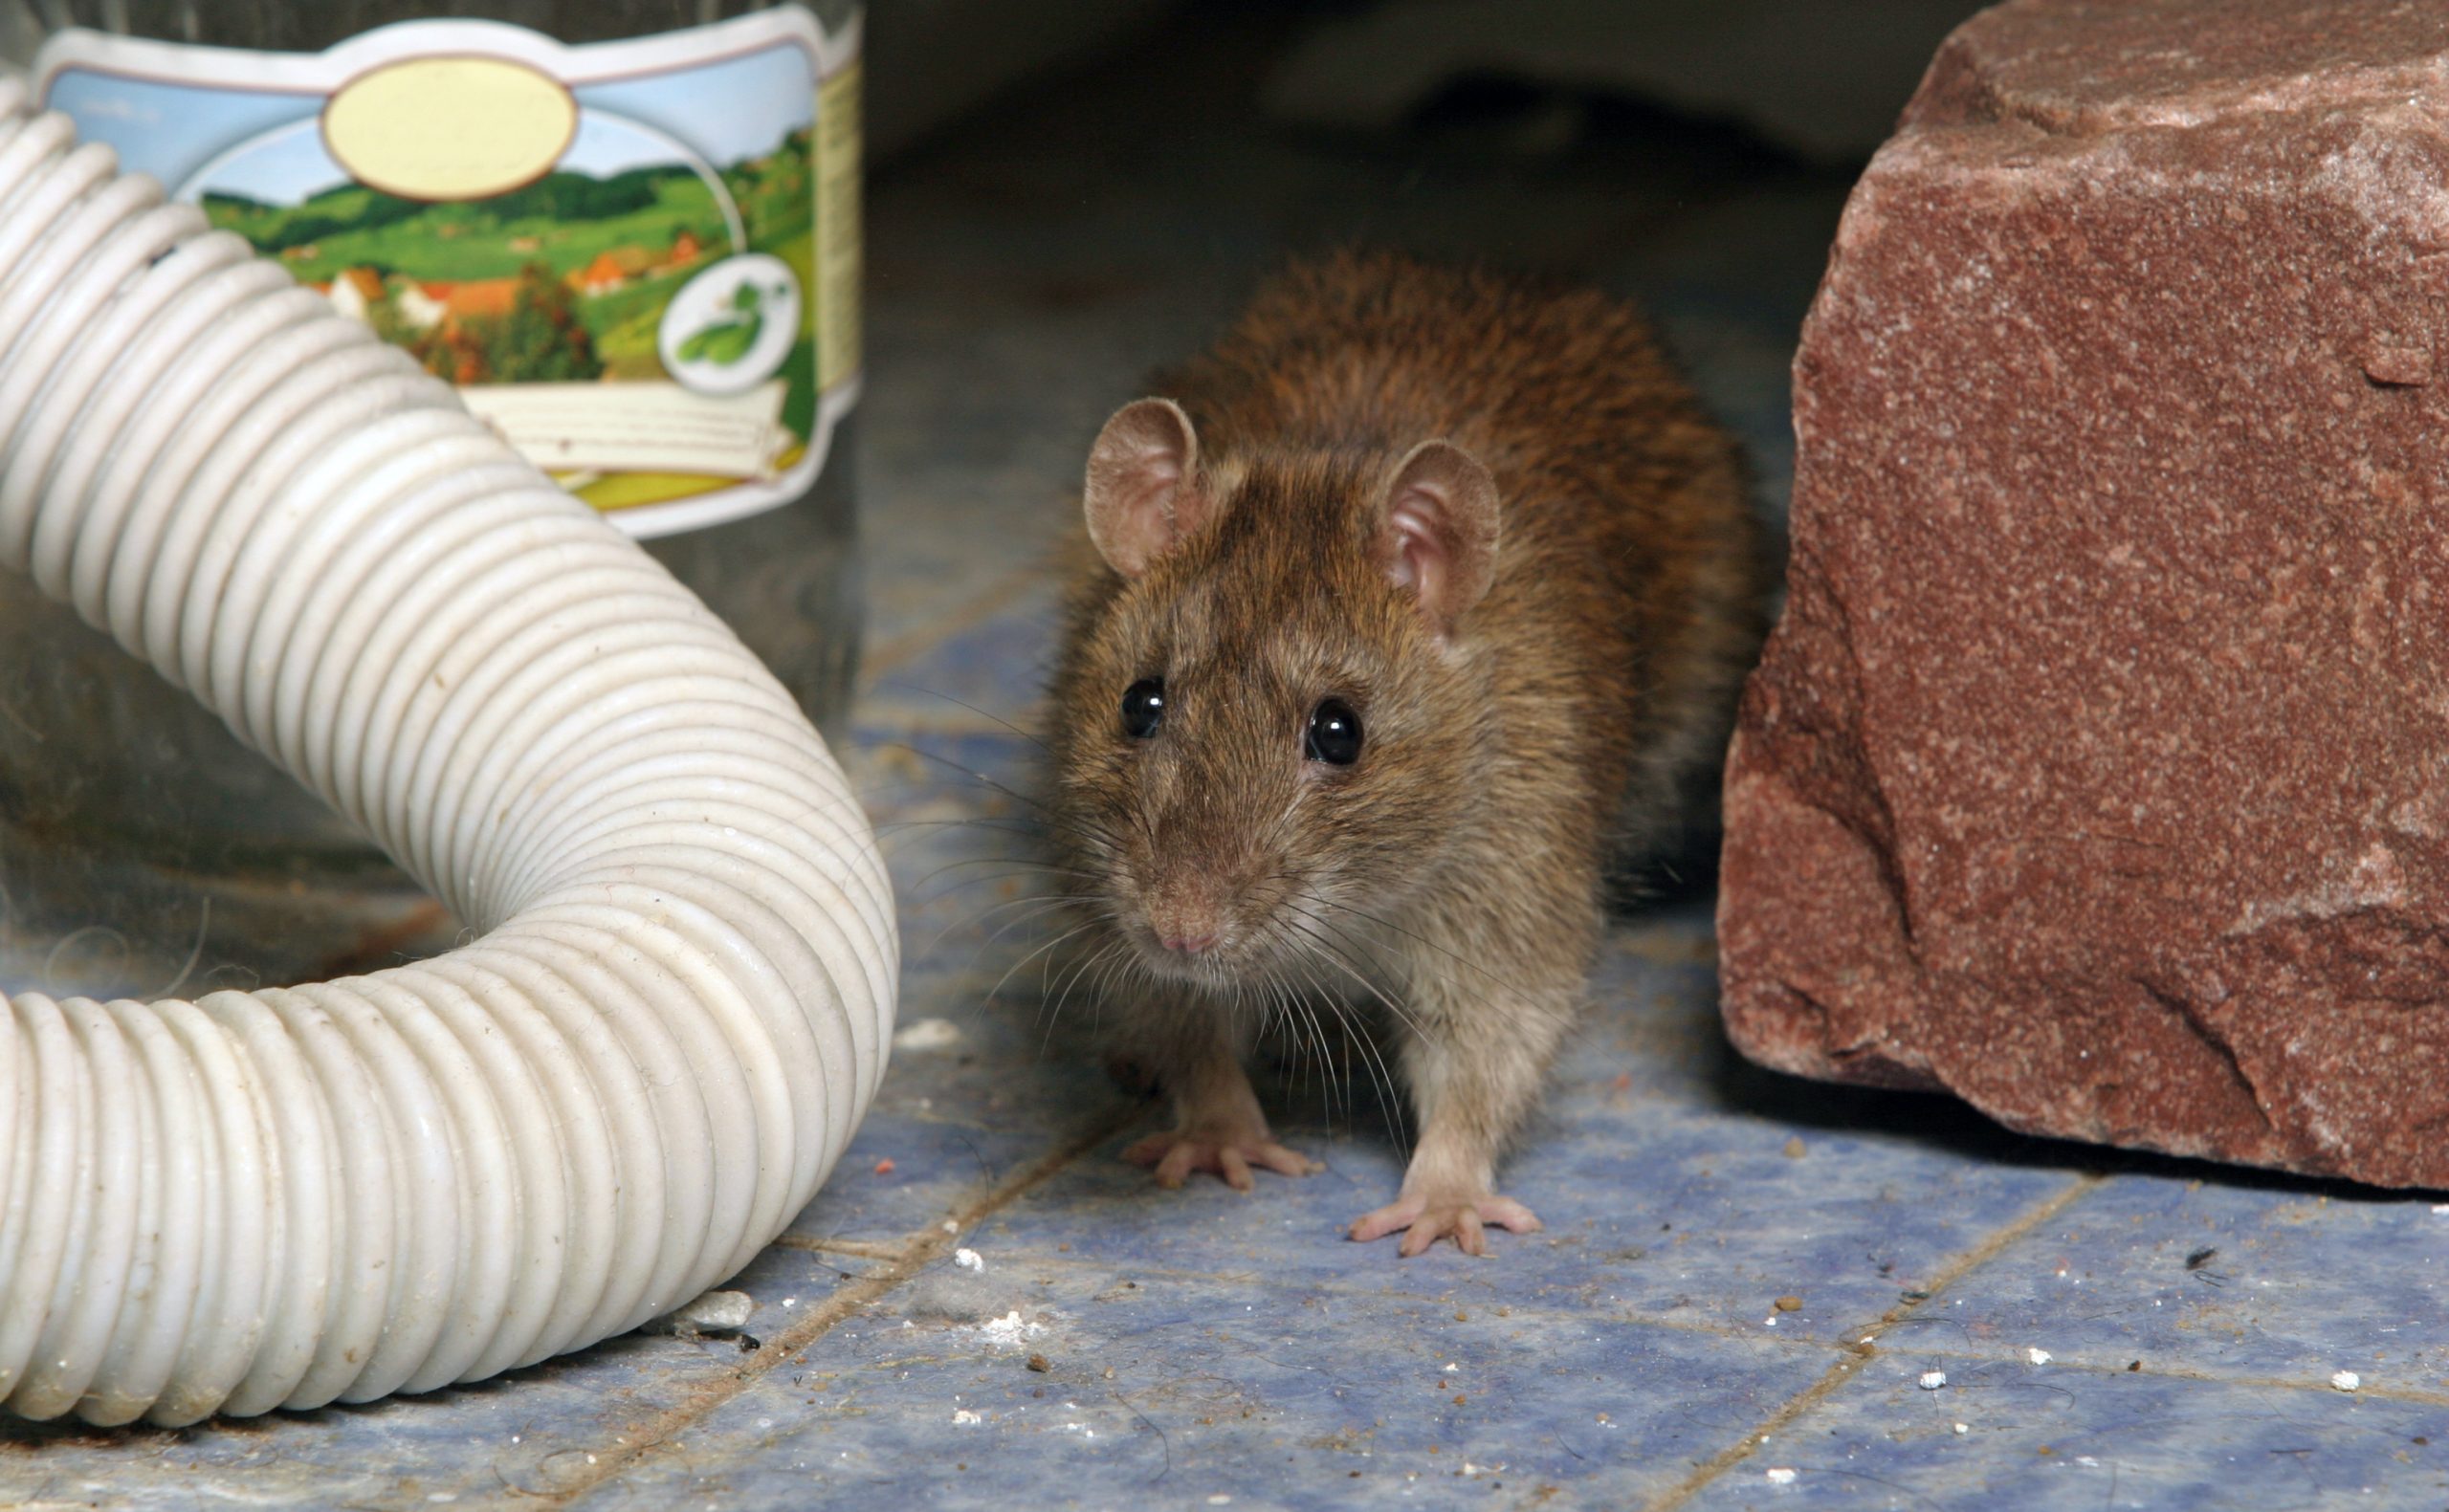 How much does it cost for mice extermination?